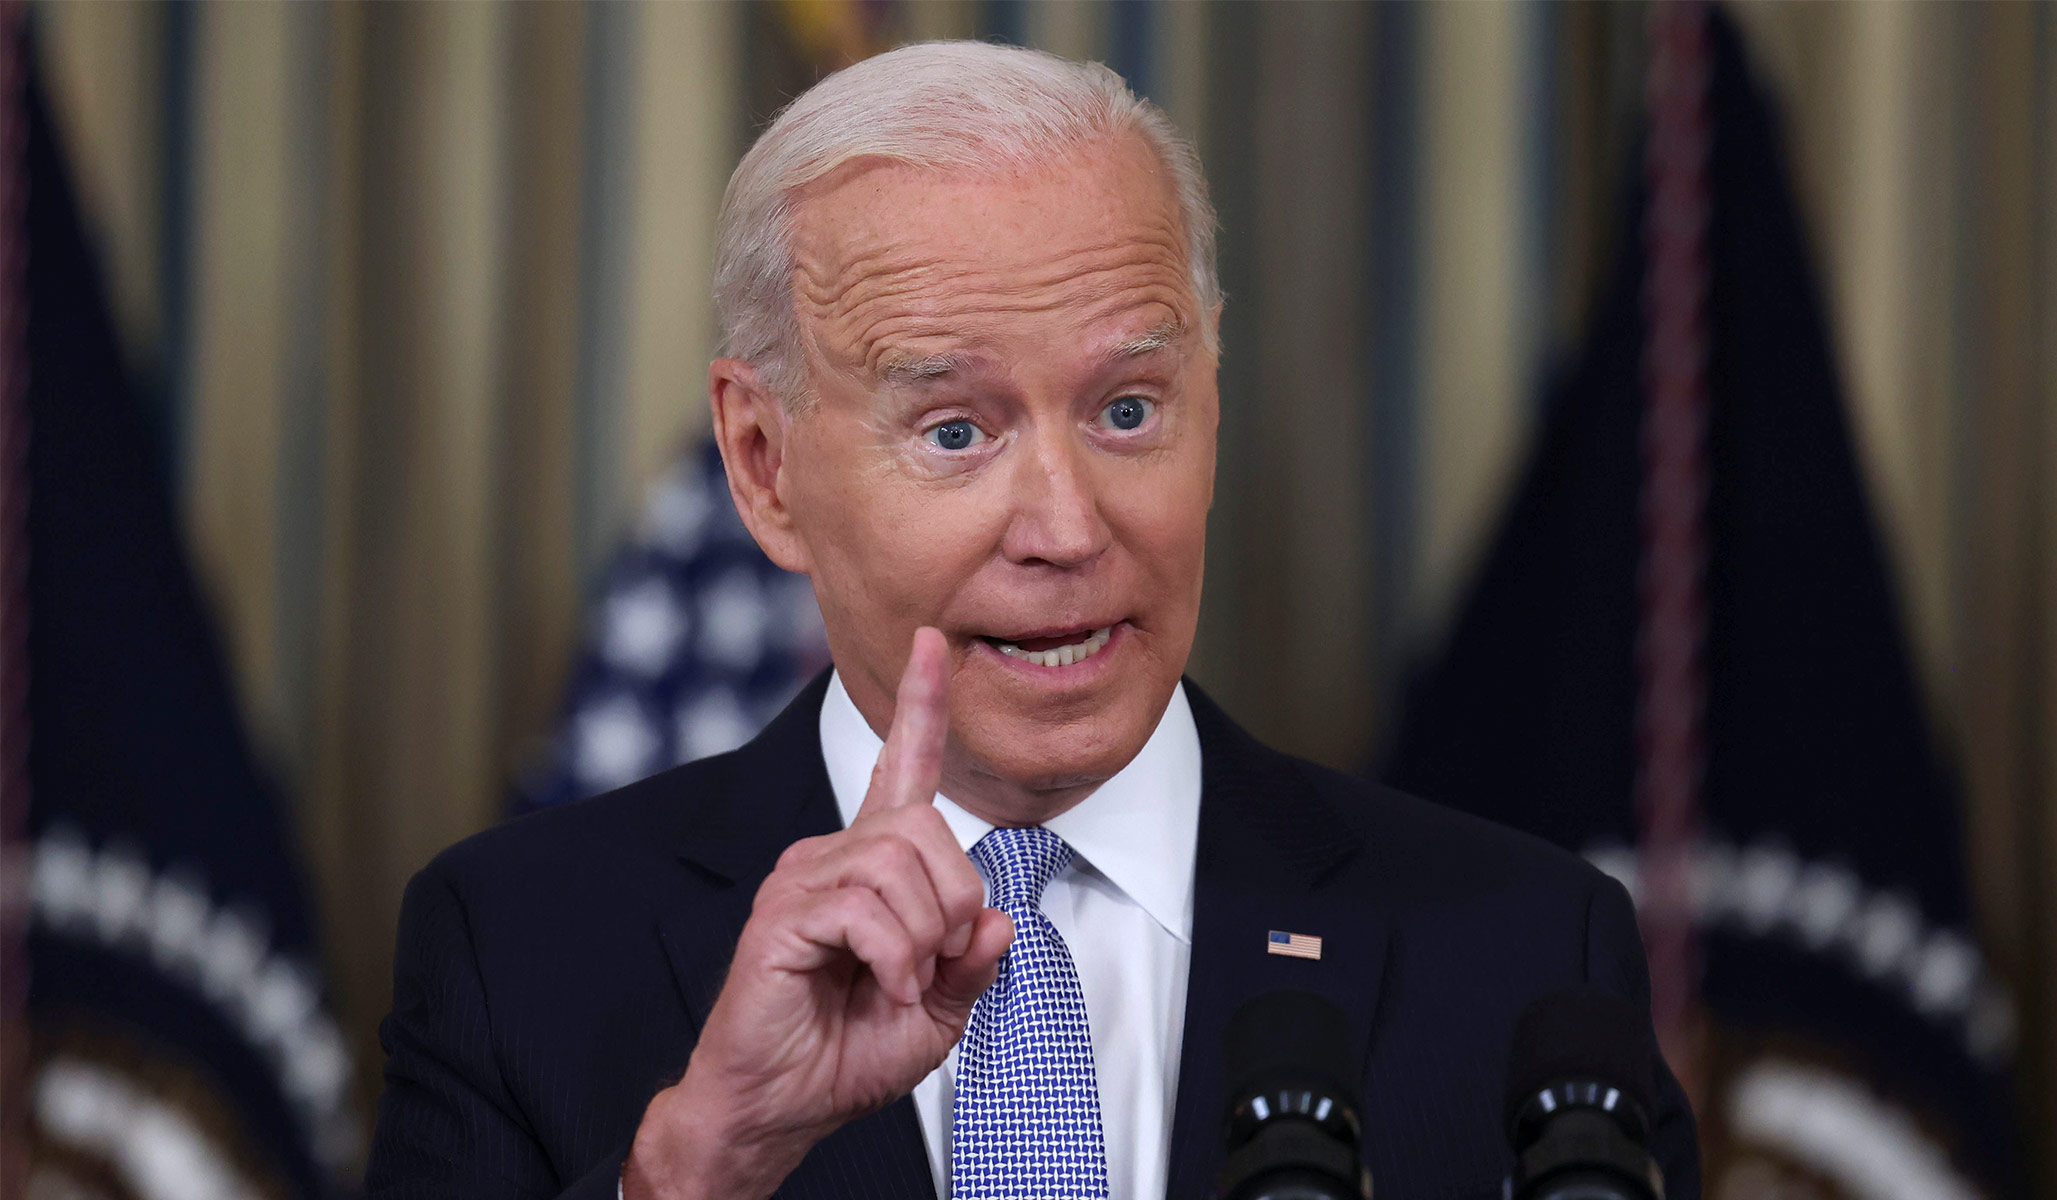 Border Patrol Outraged by Biden's Scapegoating: 'He Just Started a War'